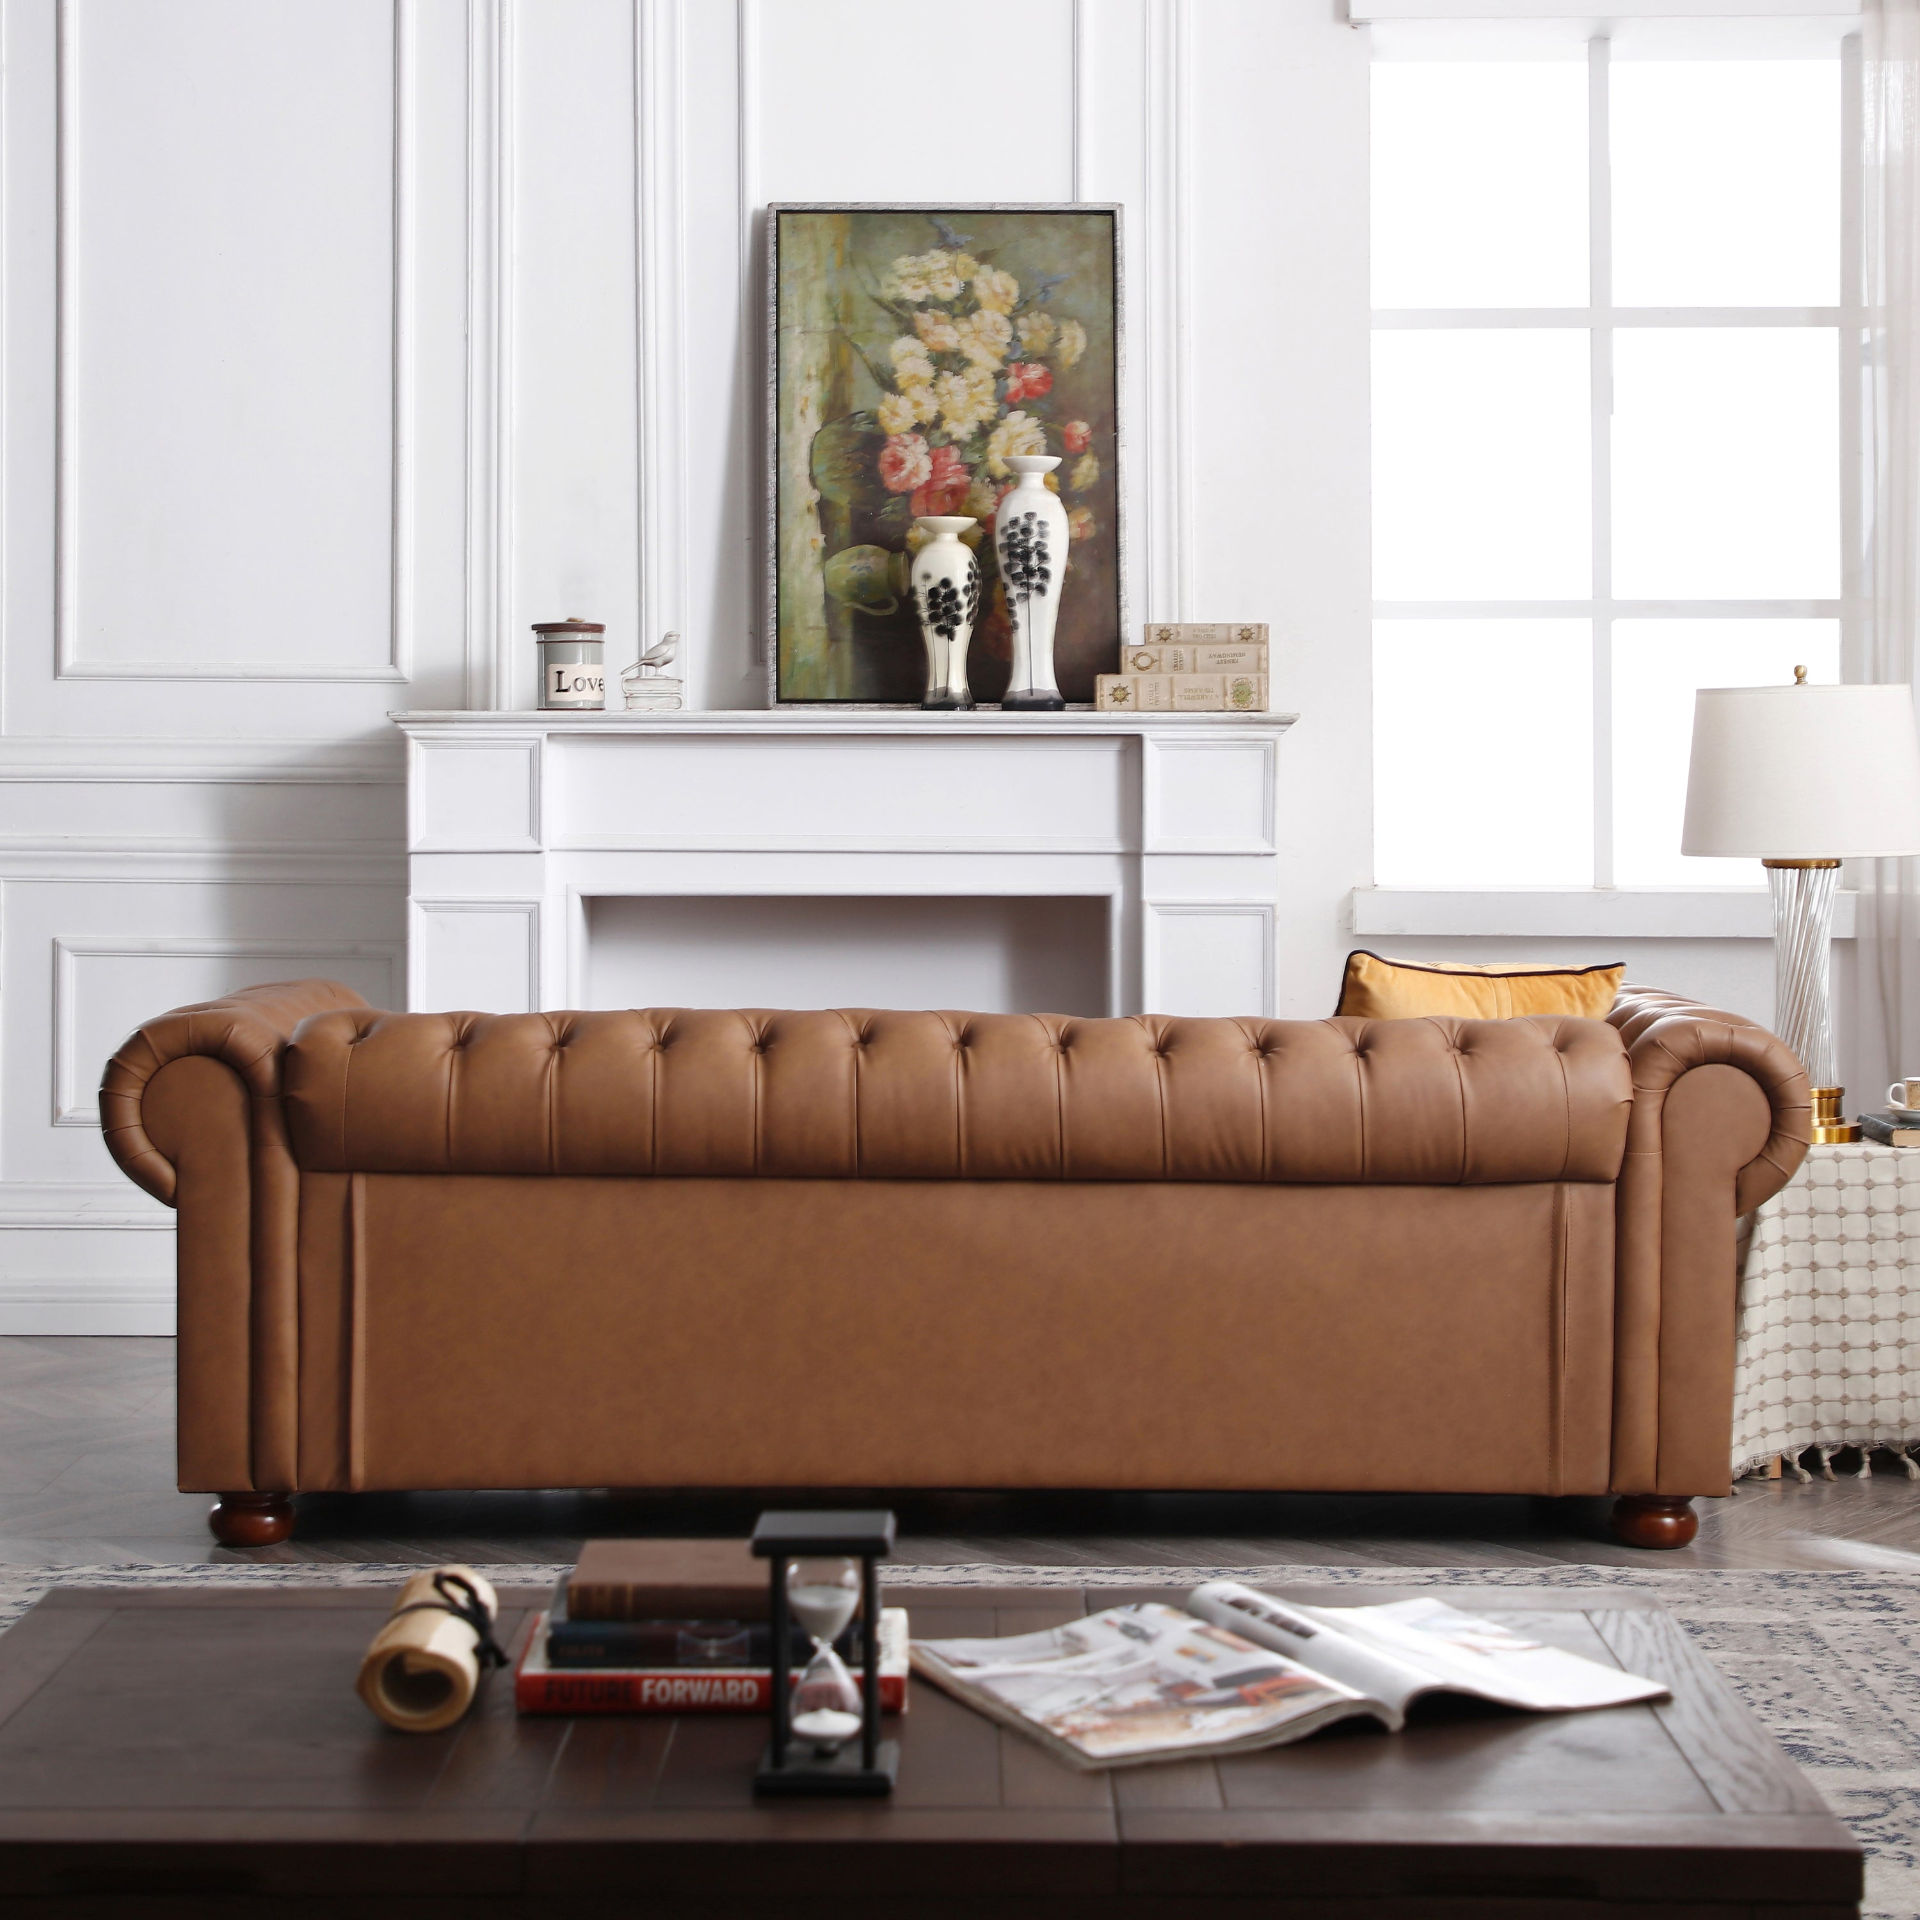 Brown - Royal Retreat Faux Leather Chesterfield Sofa (88.5")